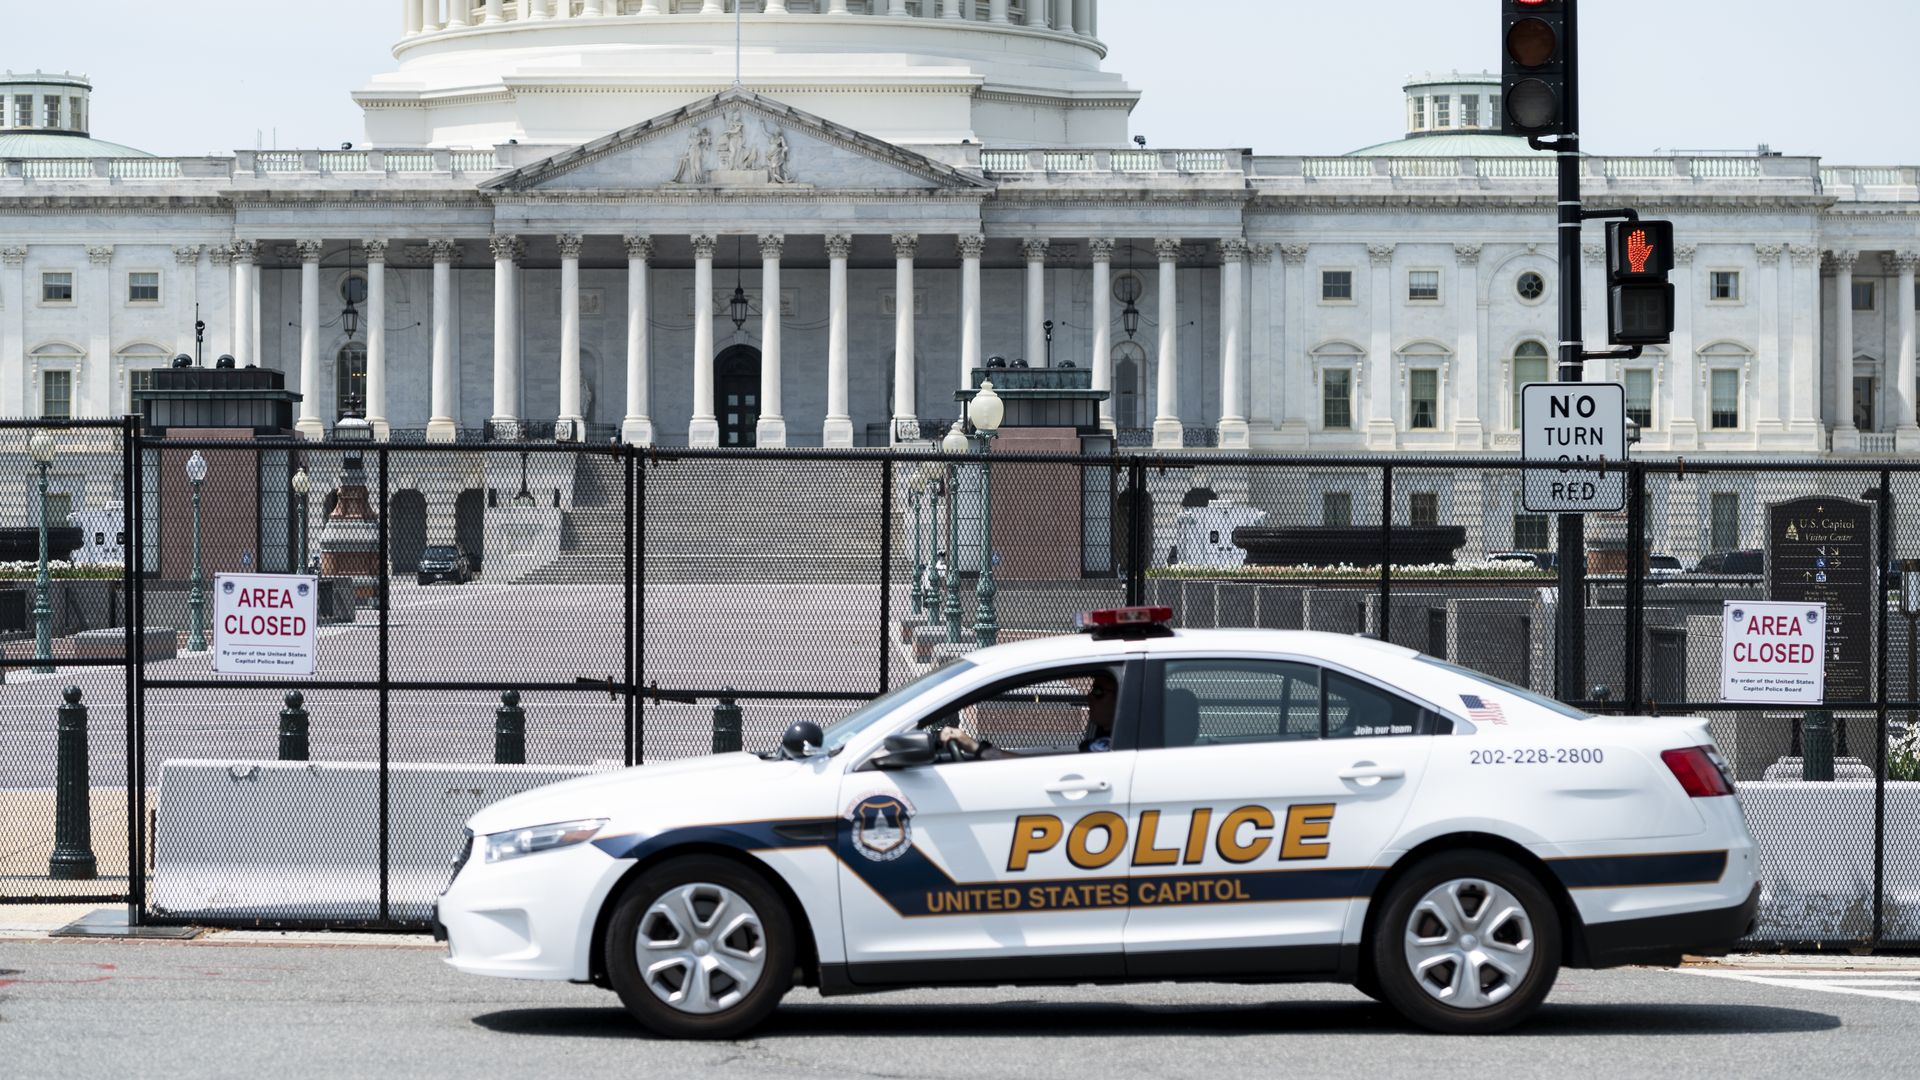 A Capitol police car sits in front of the Capitol building